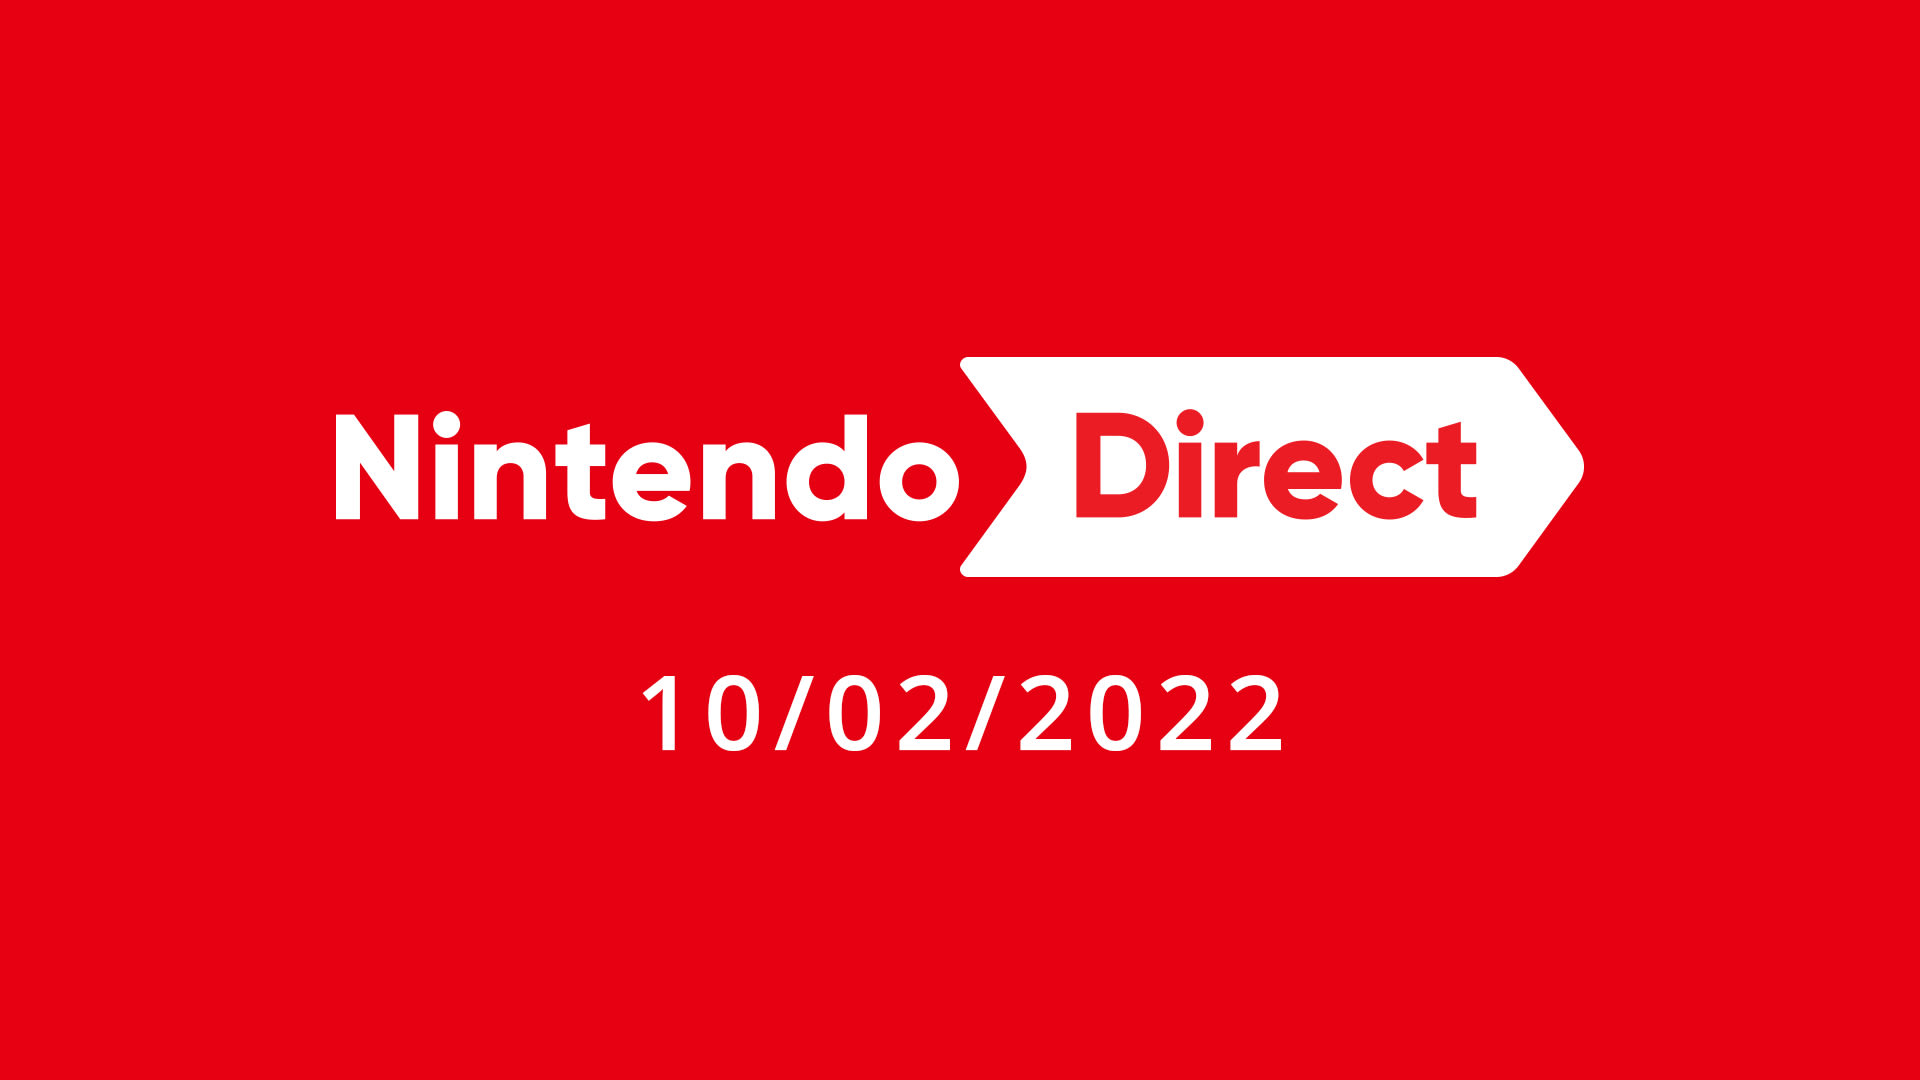 Xenoblade Chronicles 3, Nintendo Switch Sports, Mario Strikers: Battle League Football, and more from the latest Nintendo Direct Banner